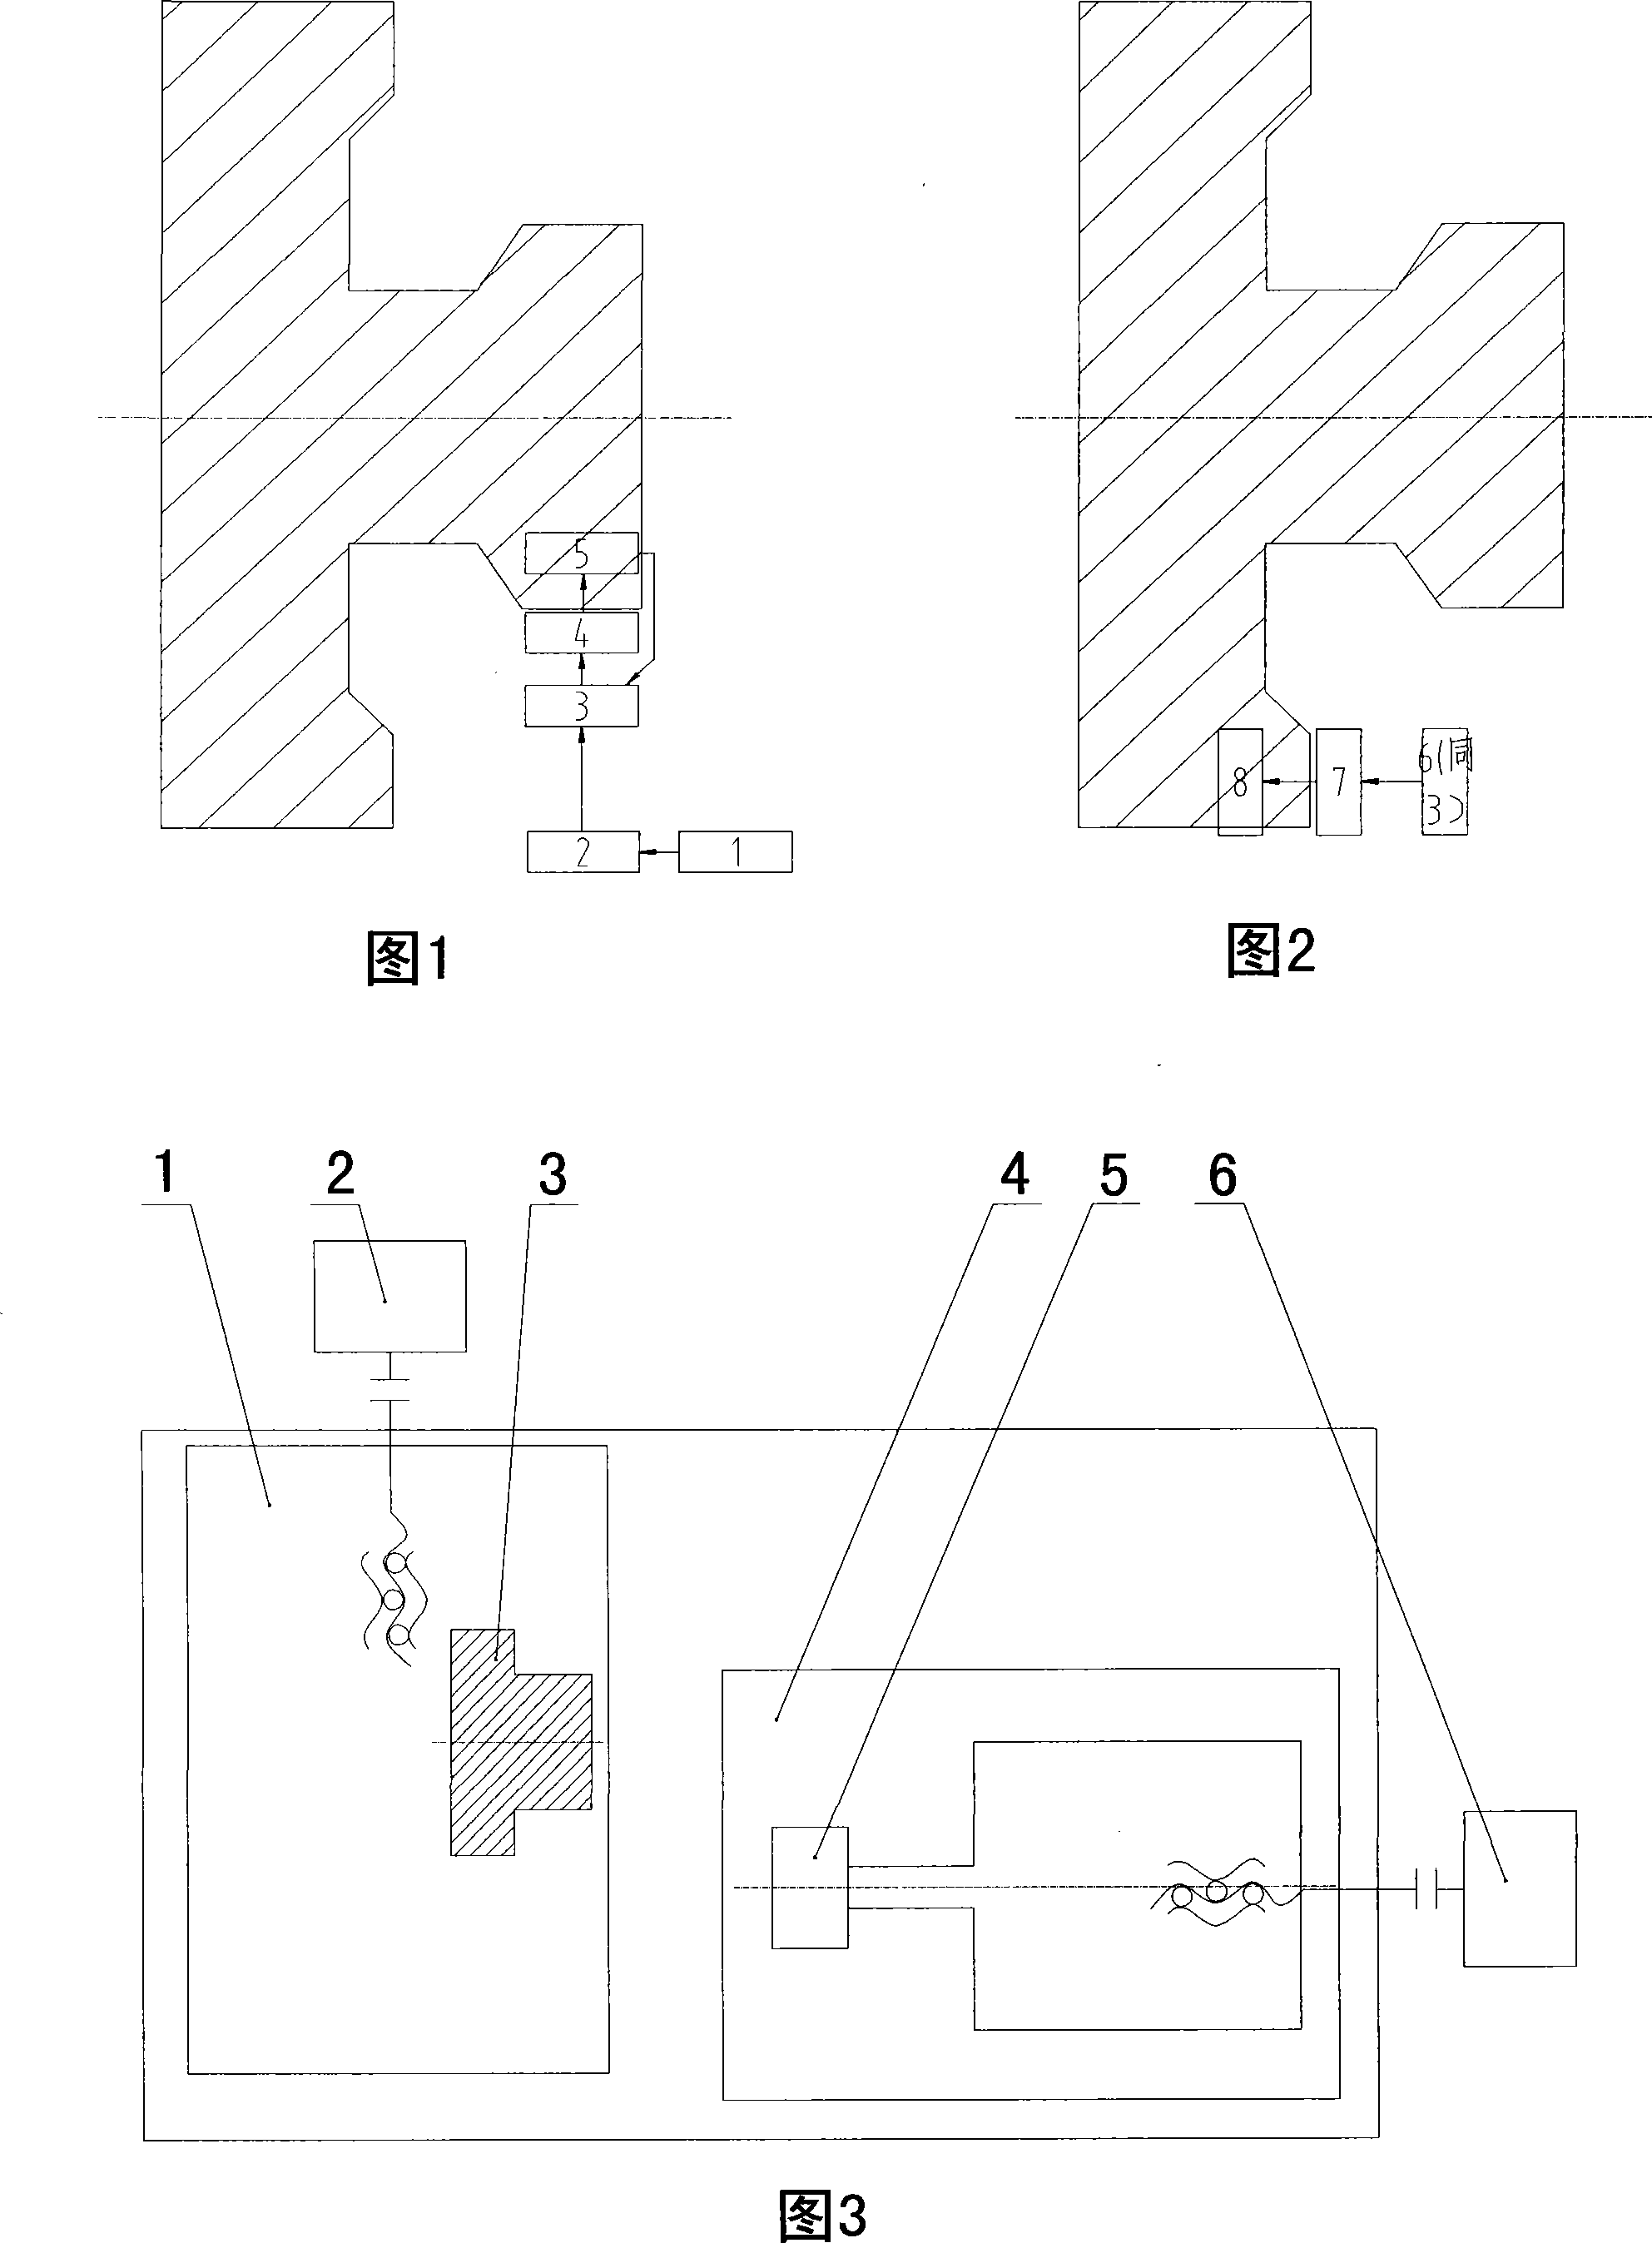 Method for abrasively processing flange bearing top circle and end plane